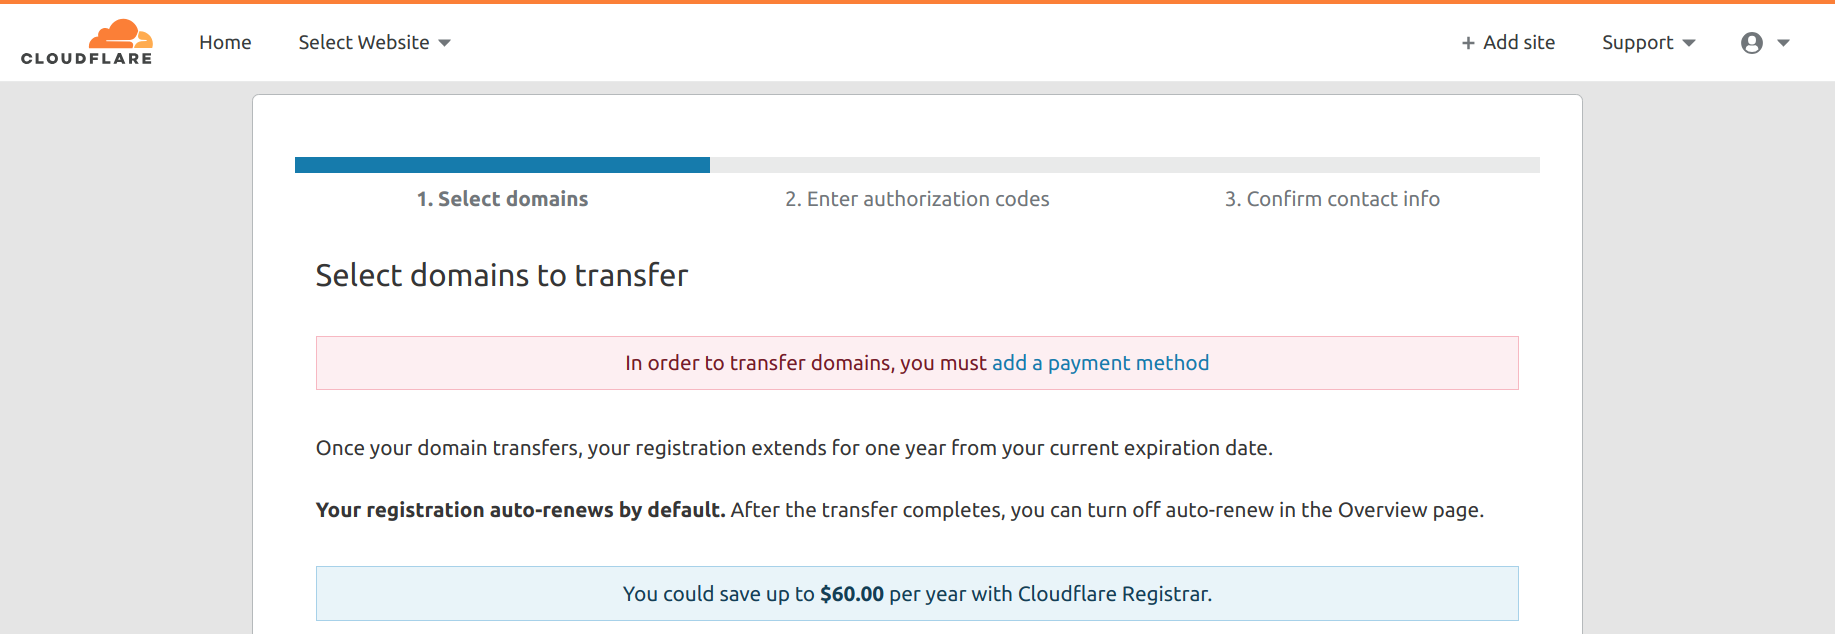 A screenshot of Cloudflare prompting me to add a payment method to continue.